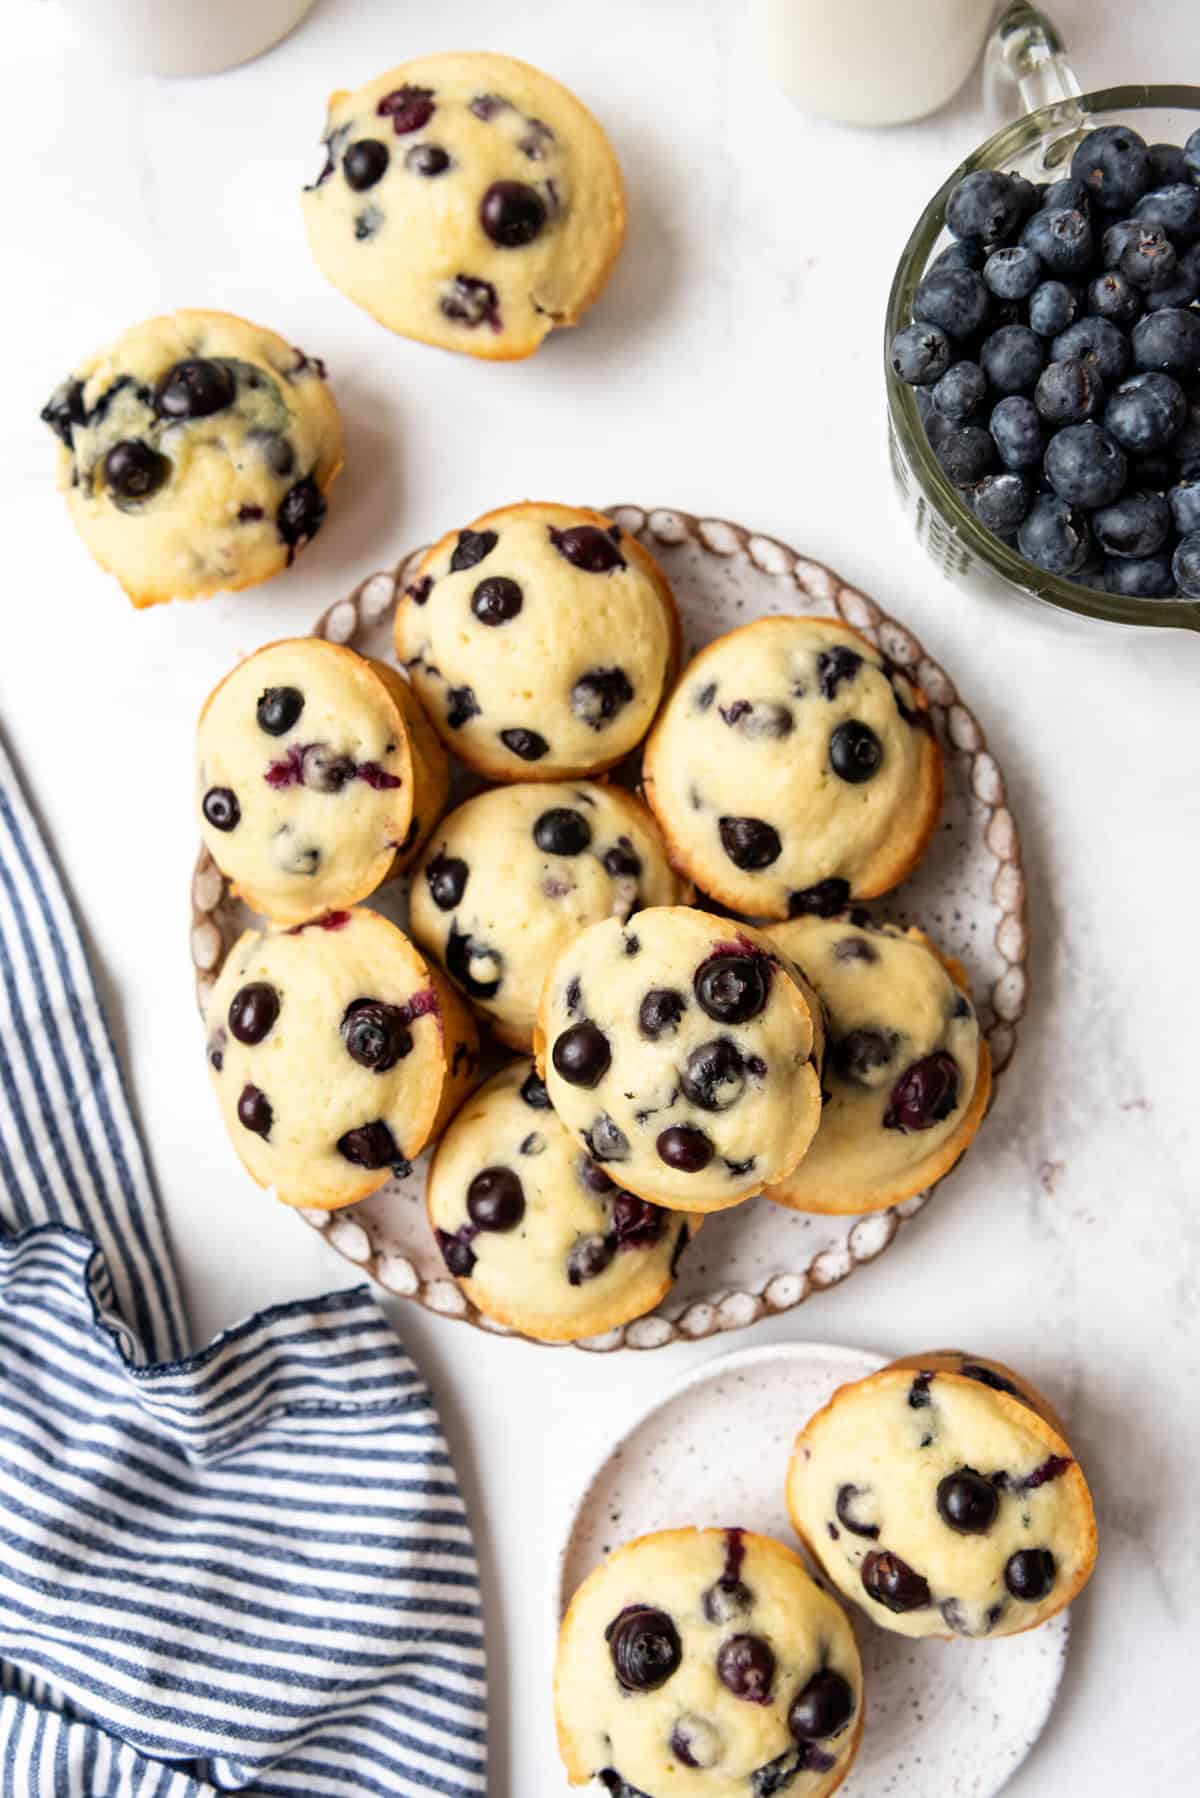 A plate full of blueberry muffins next to a bowl of fresh blueberries and a striped linen napkin.